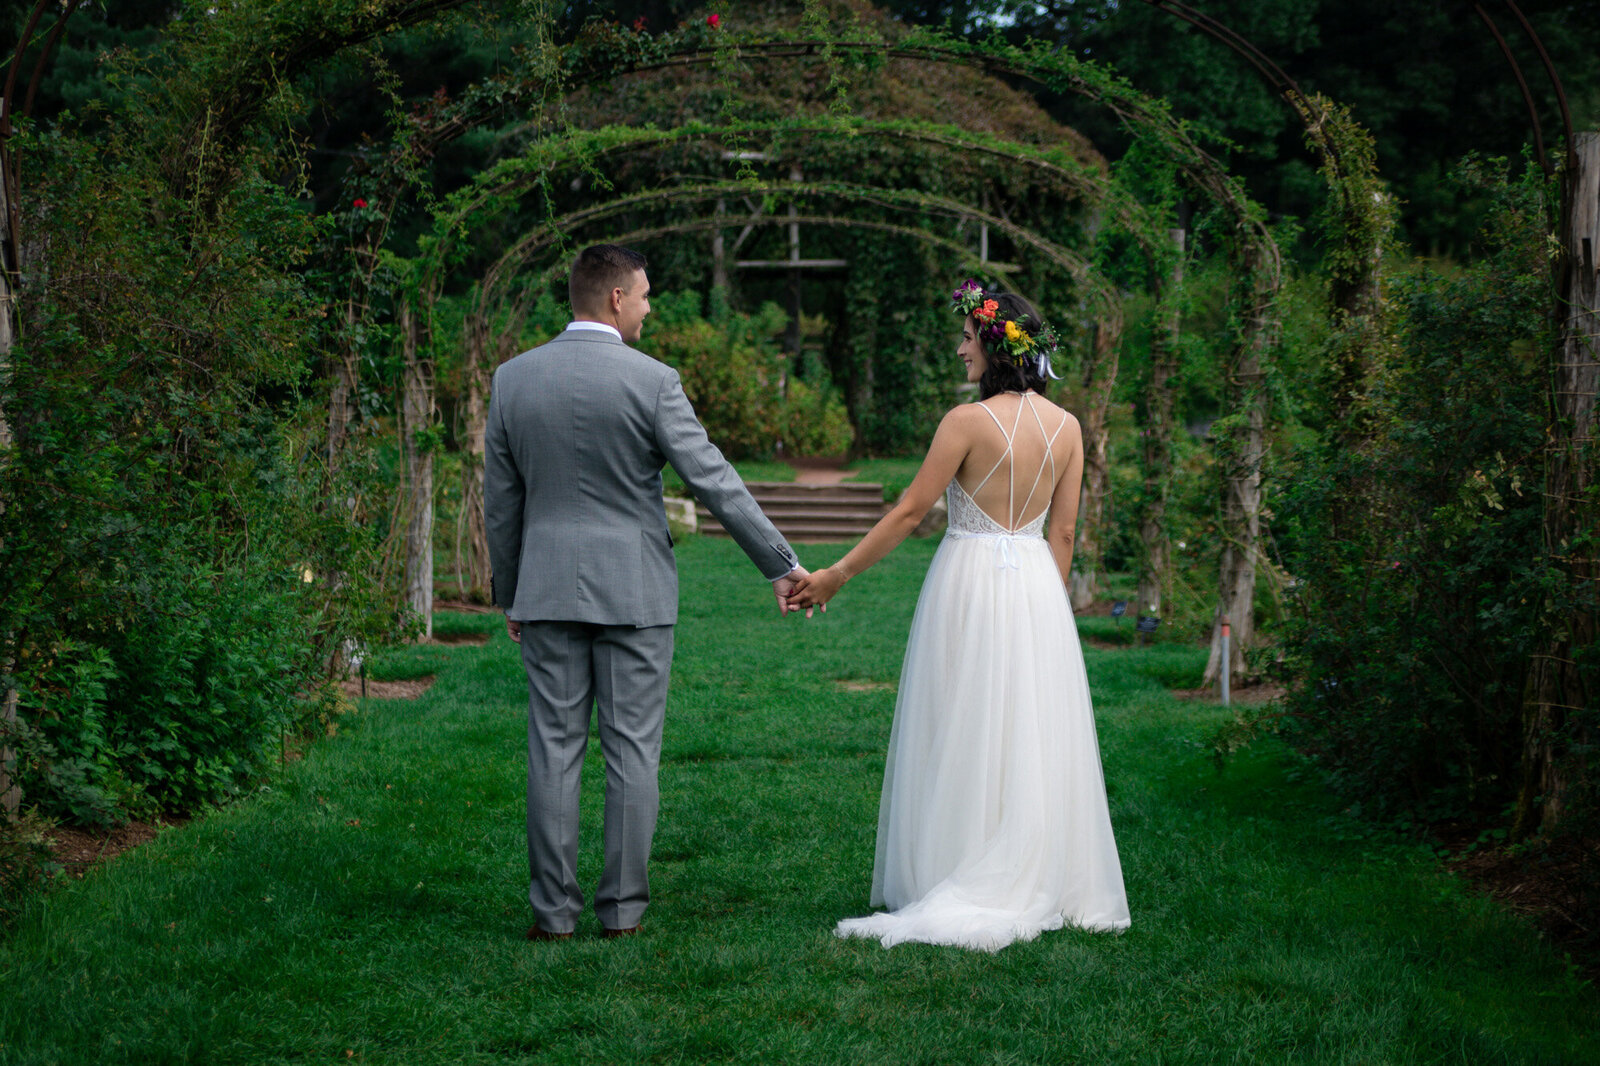 Bride and groom holding each other's hand while walking towards the pathway that has leaves and flowers arch